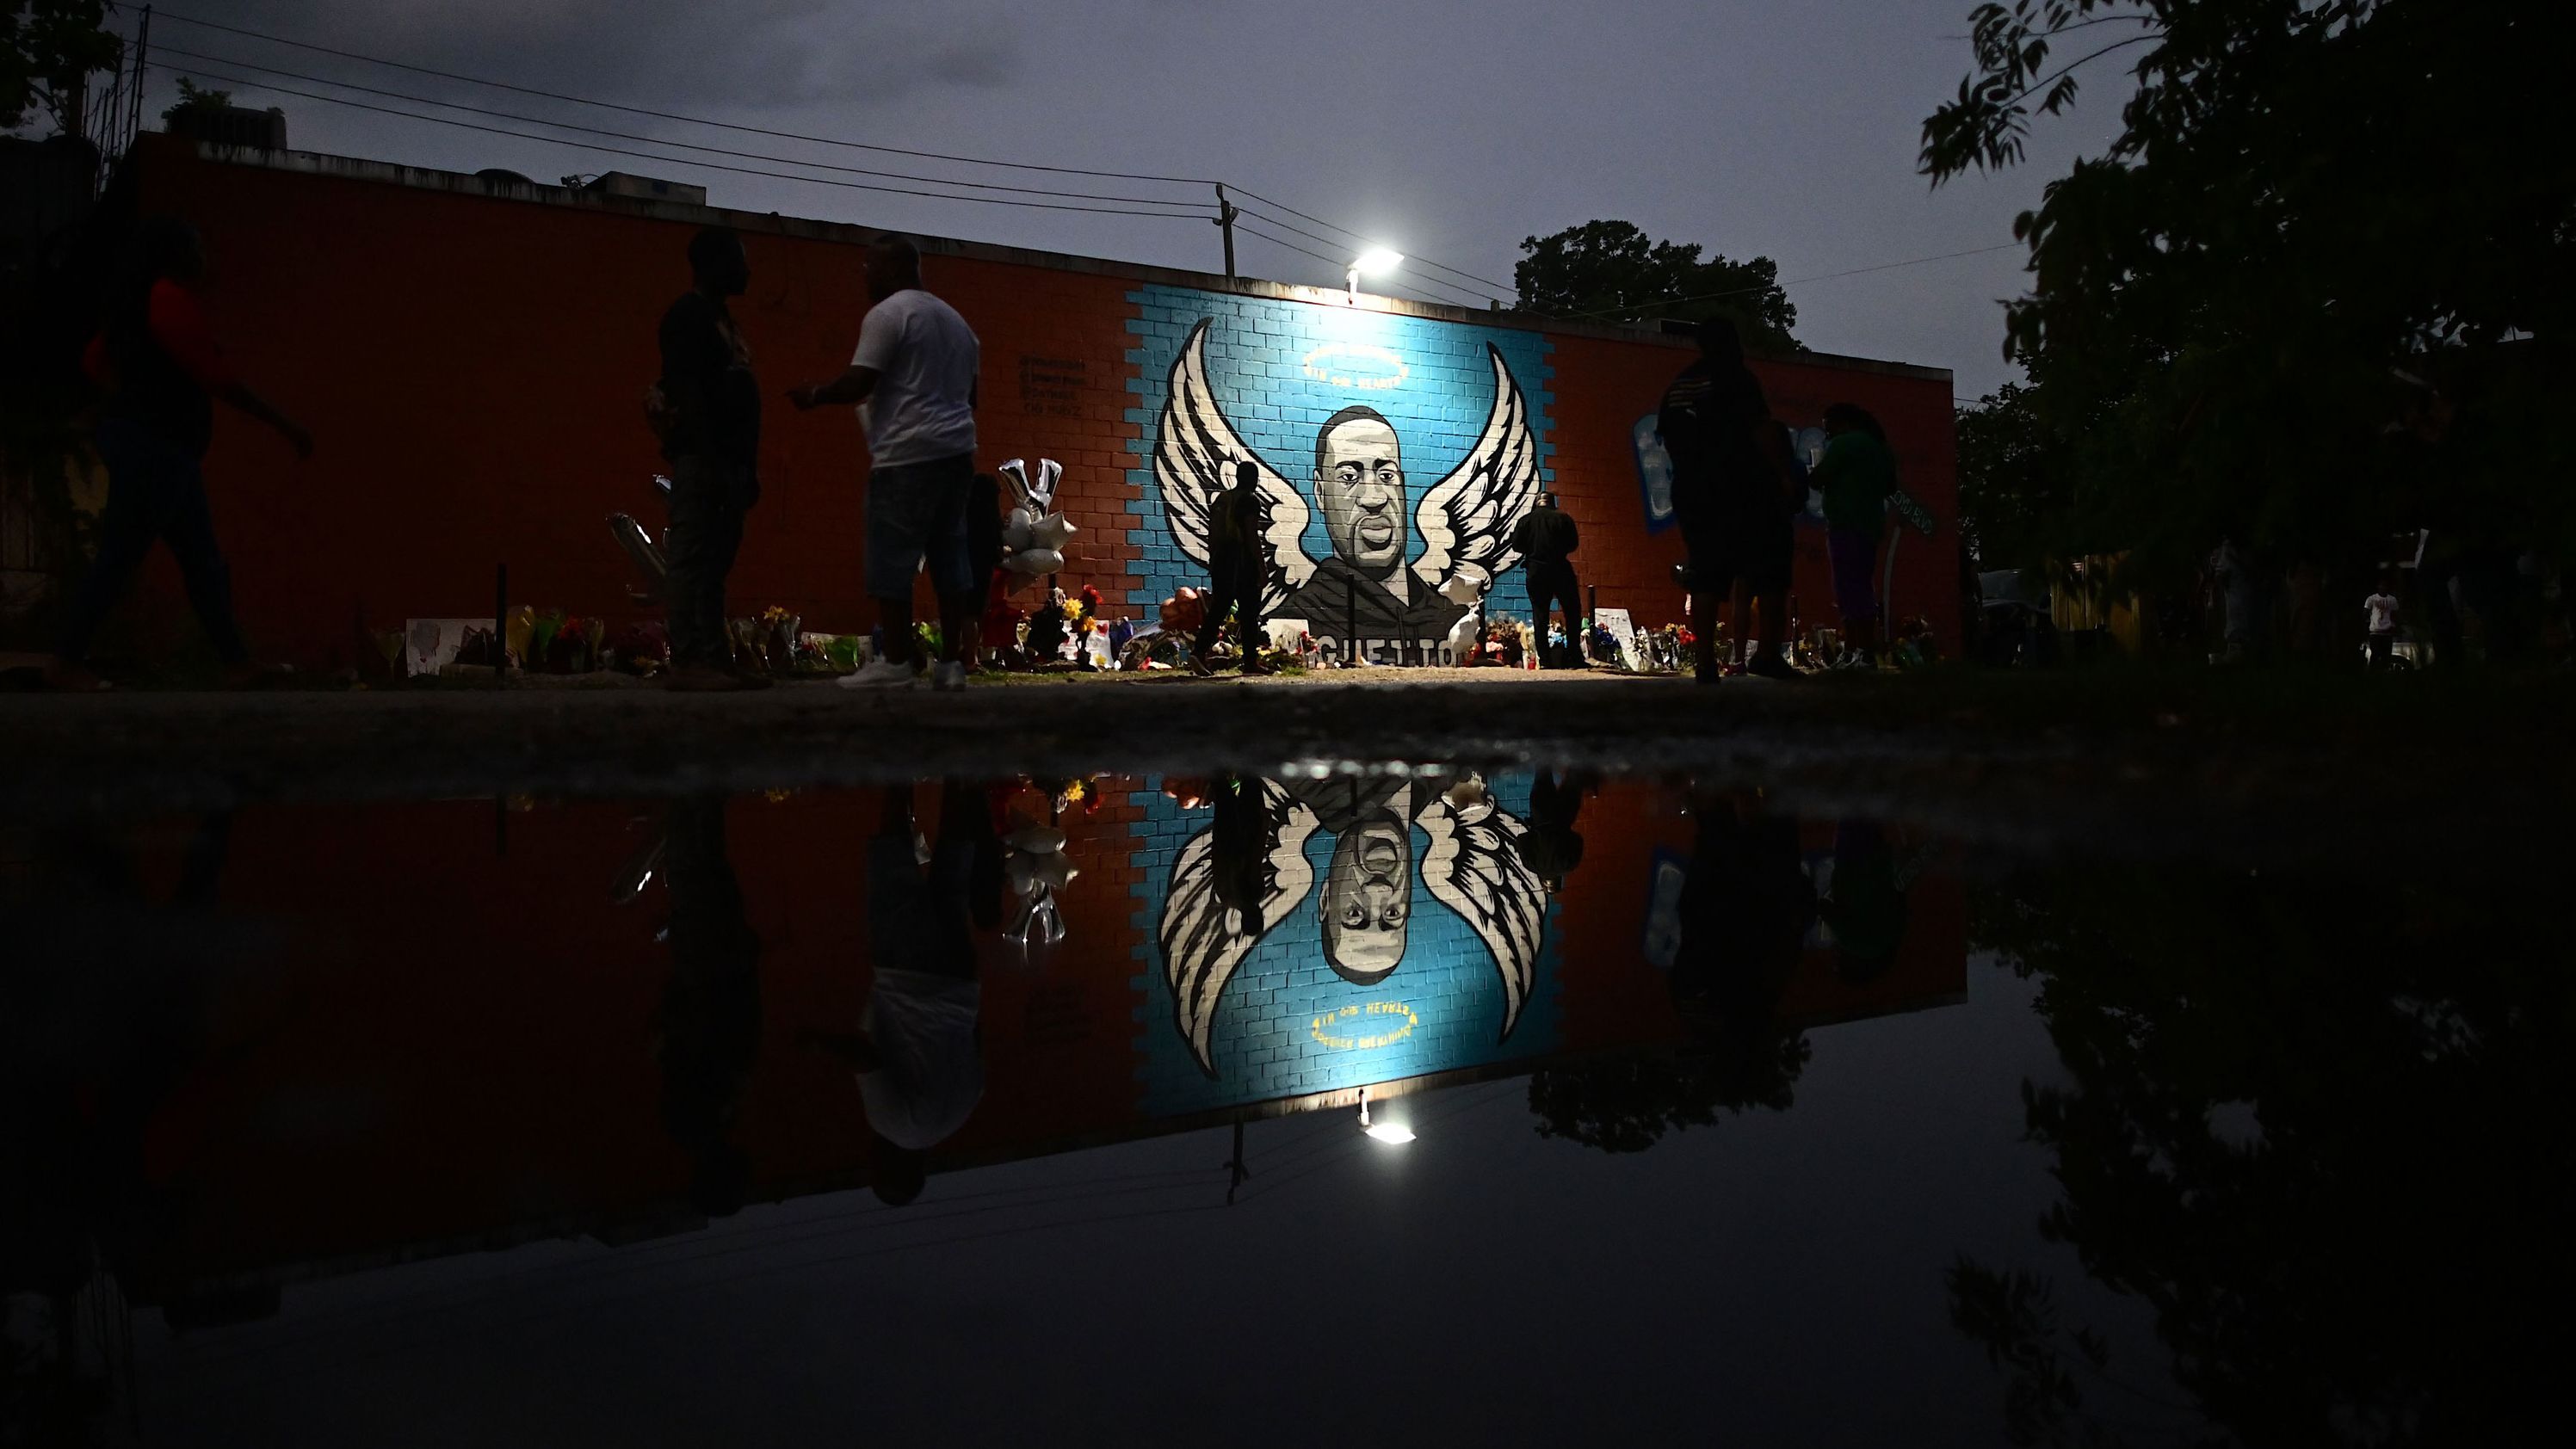 Floyd is depicted as an angel in his hometown of Houston. <a href="https://www.cnn.com/2020/06/03/us/george-floyd-mural-in-houston-trnd/index.html" target="_blank">The mural</a> was painted by the artist Donkeeboy on the side of Scott Food Mart.